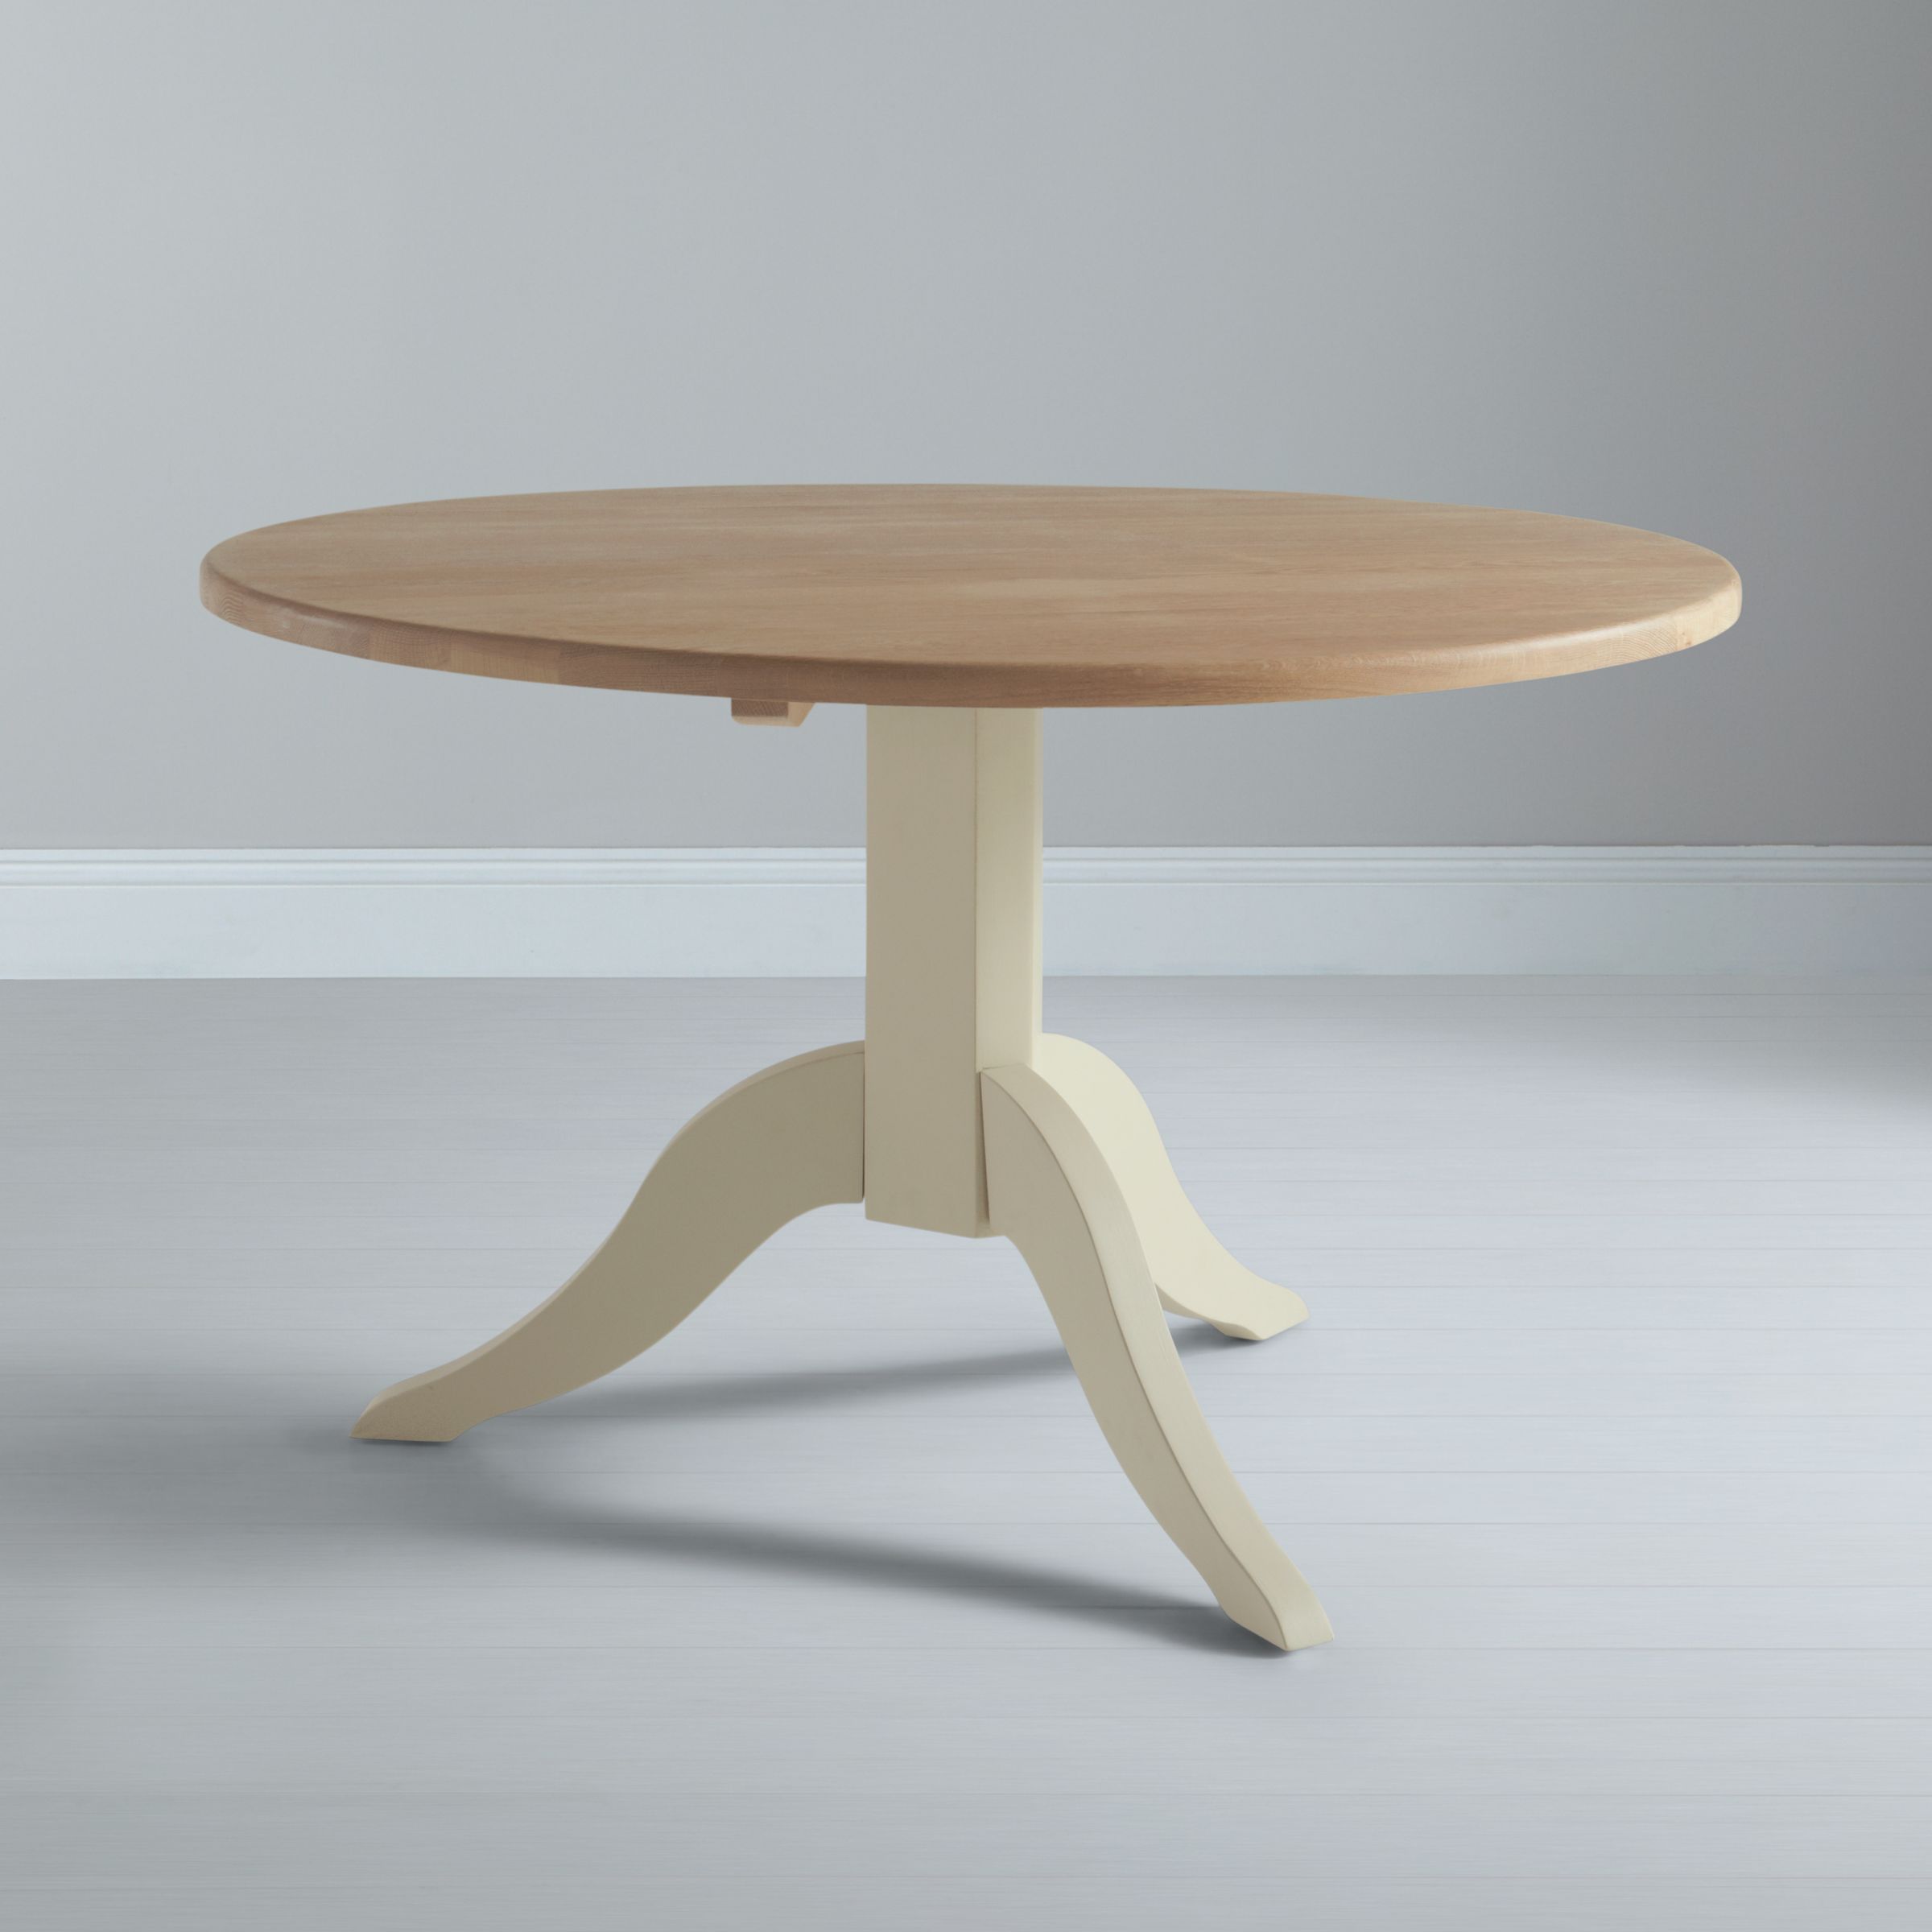 Neptune Chichester 6 Seater Round Dining Table,